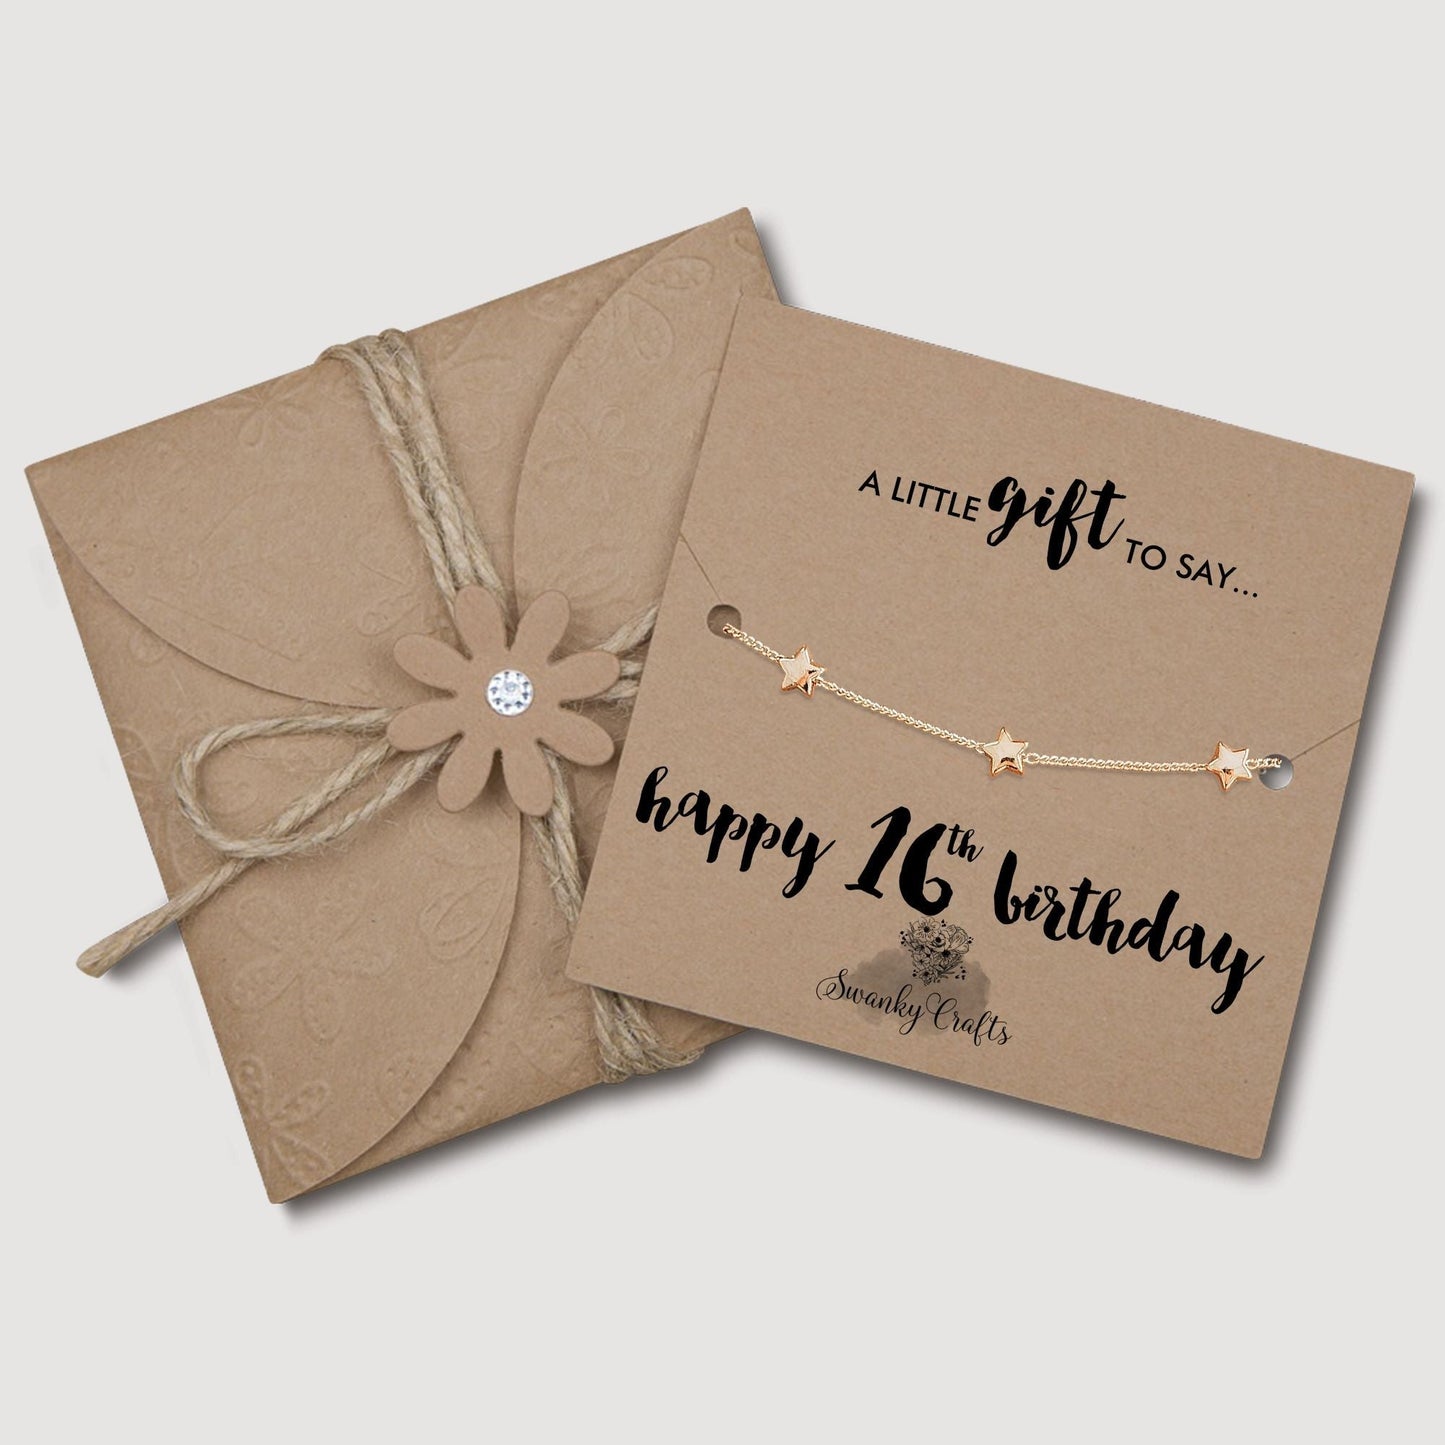 21st Birthday Gift - 18ct Gold Star Bracelet with Card and Gift Wrap